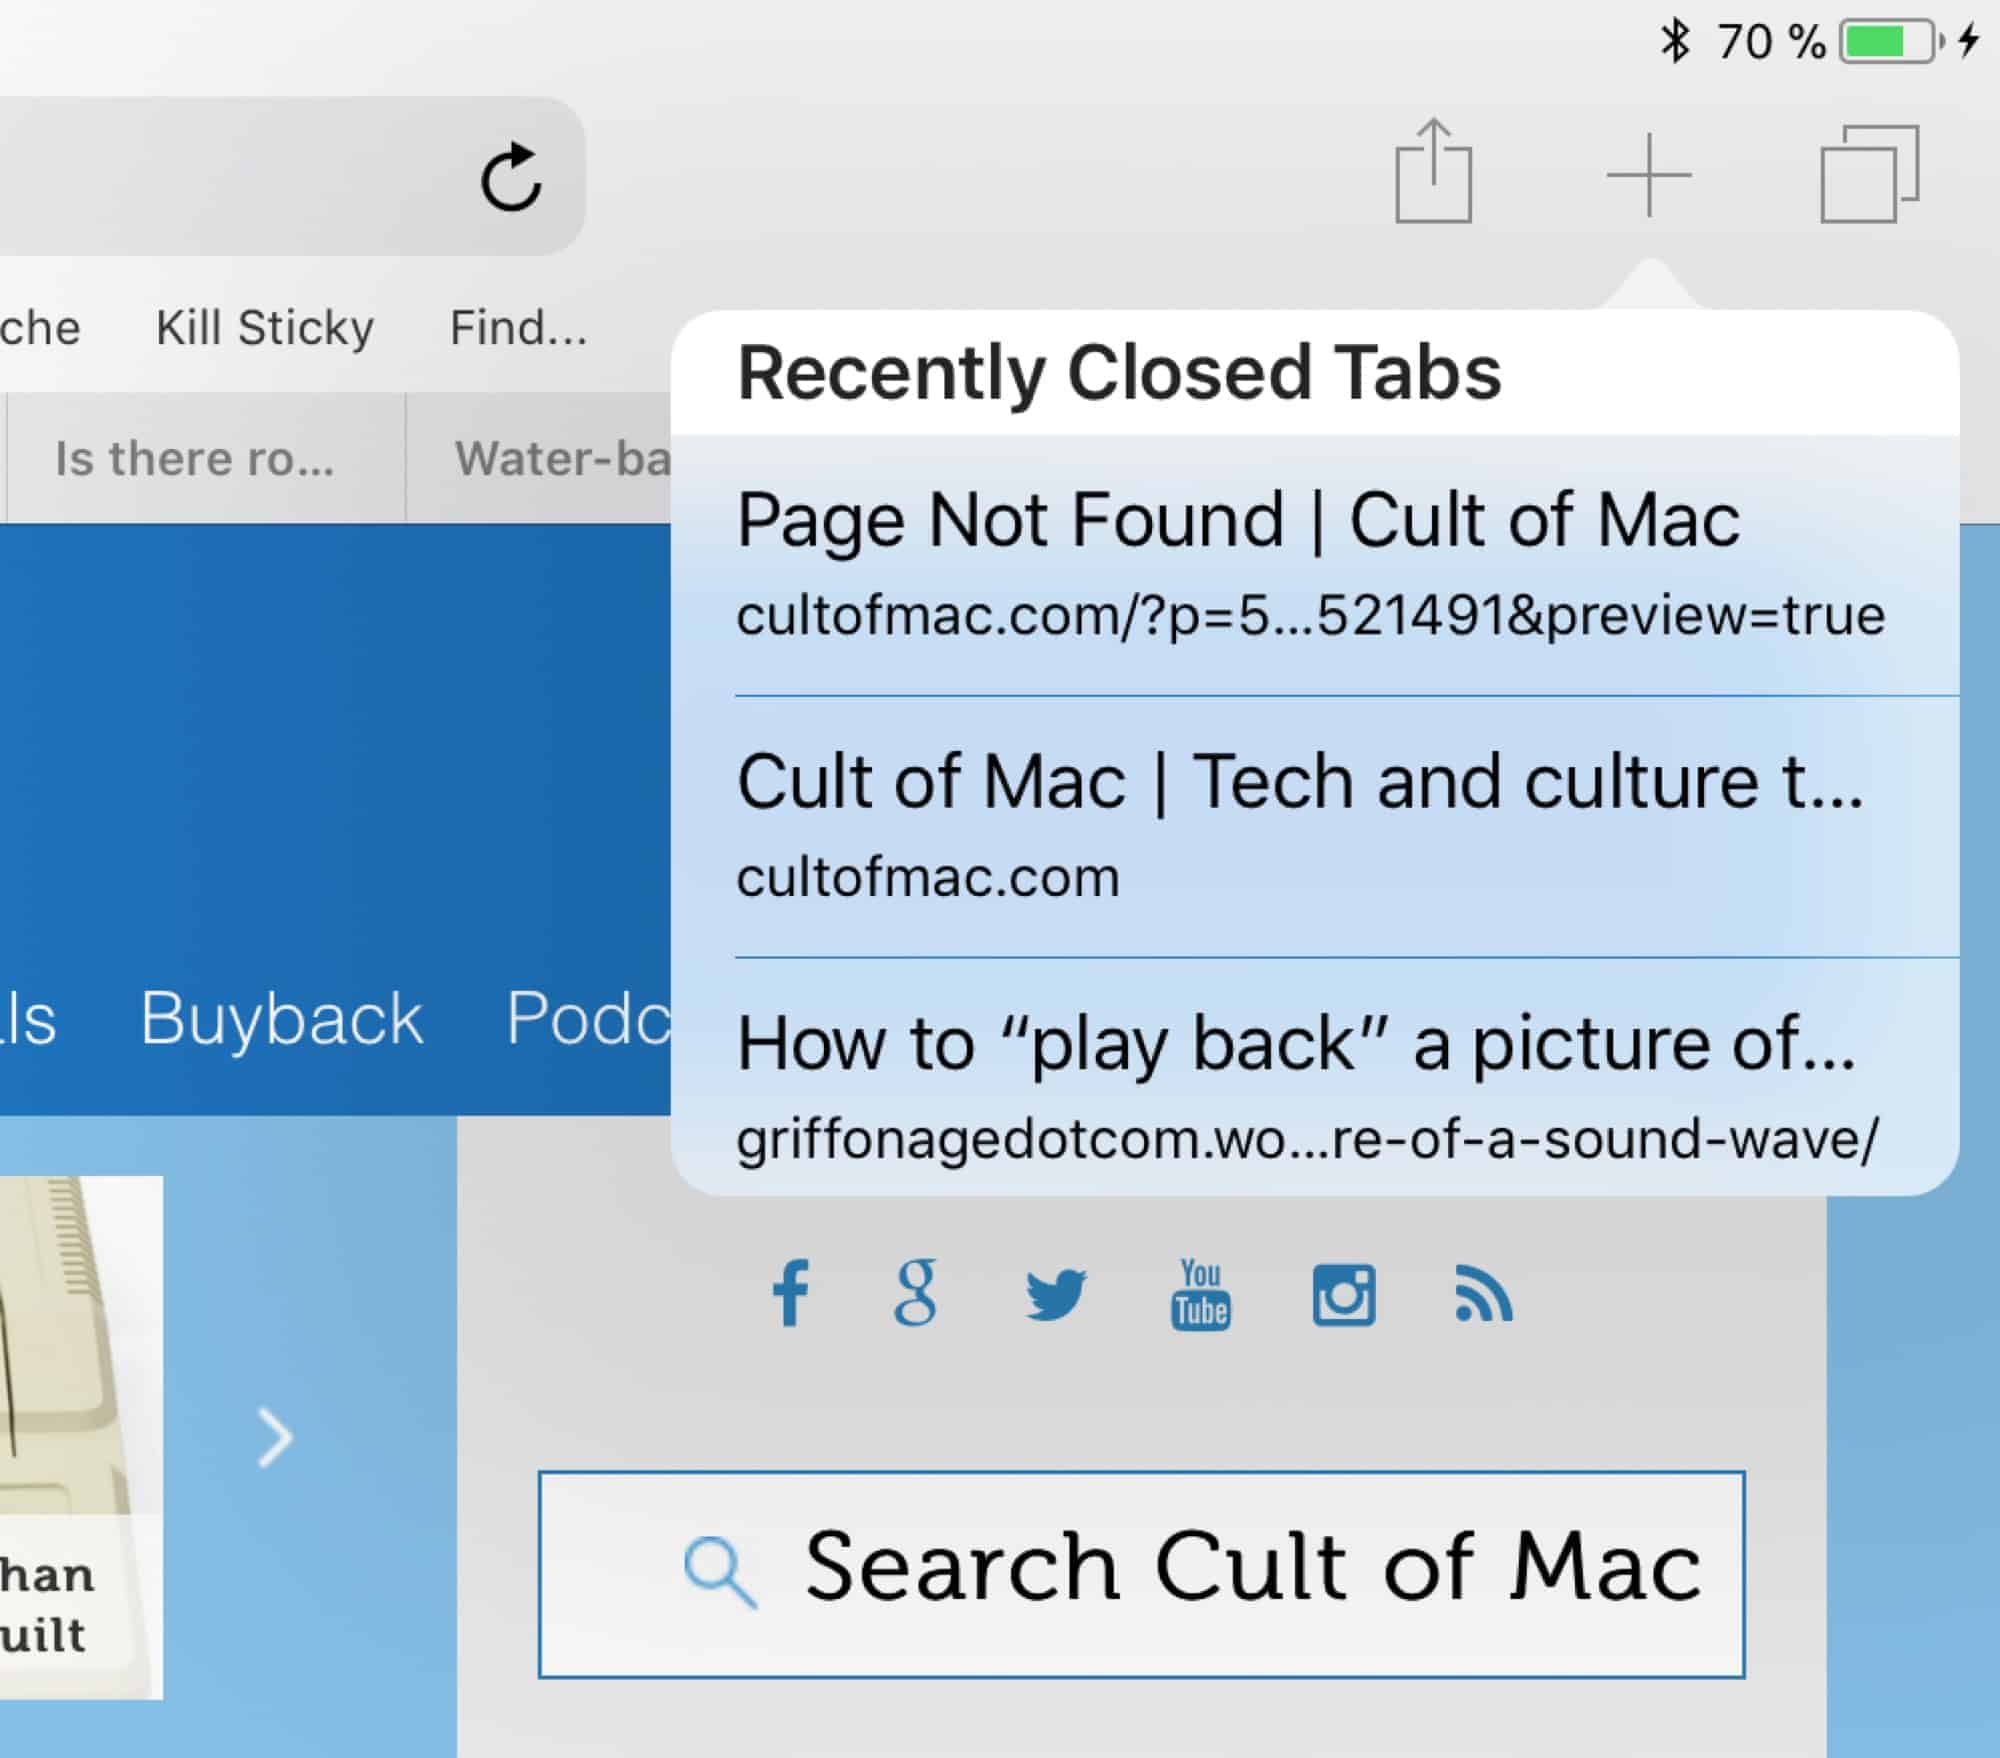 Long-press the + icon to get a list of recently-closed tabs.